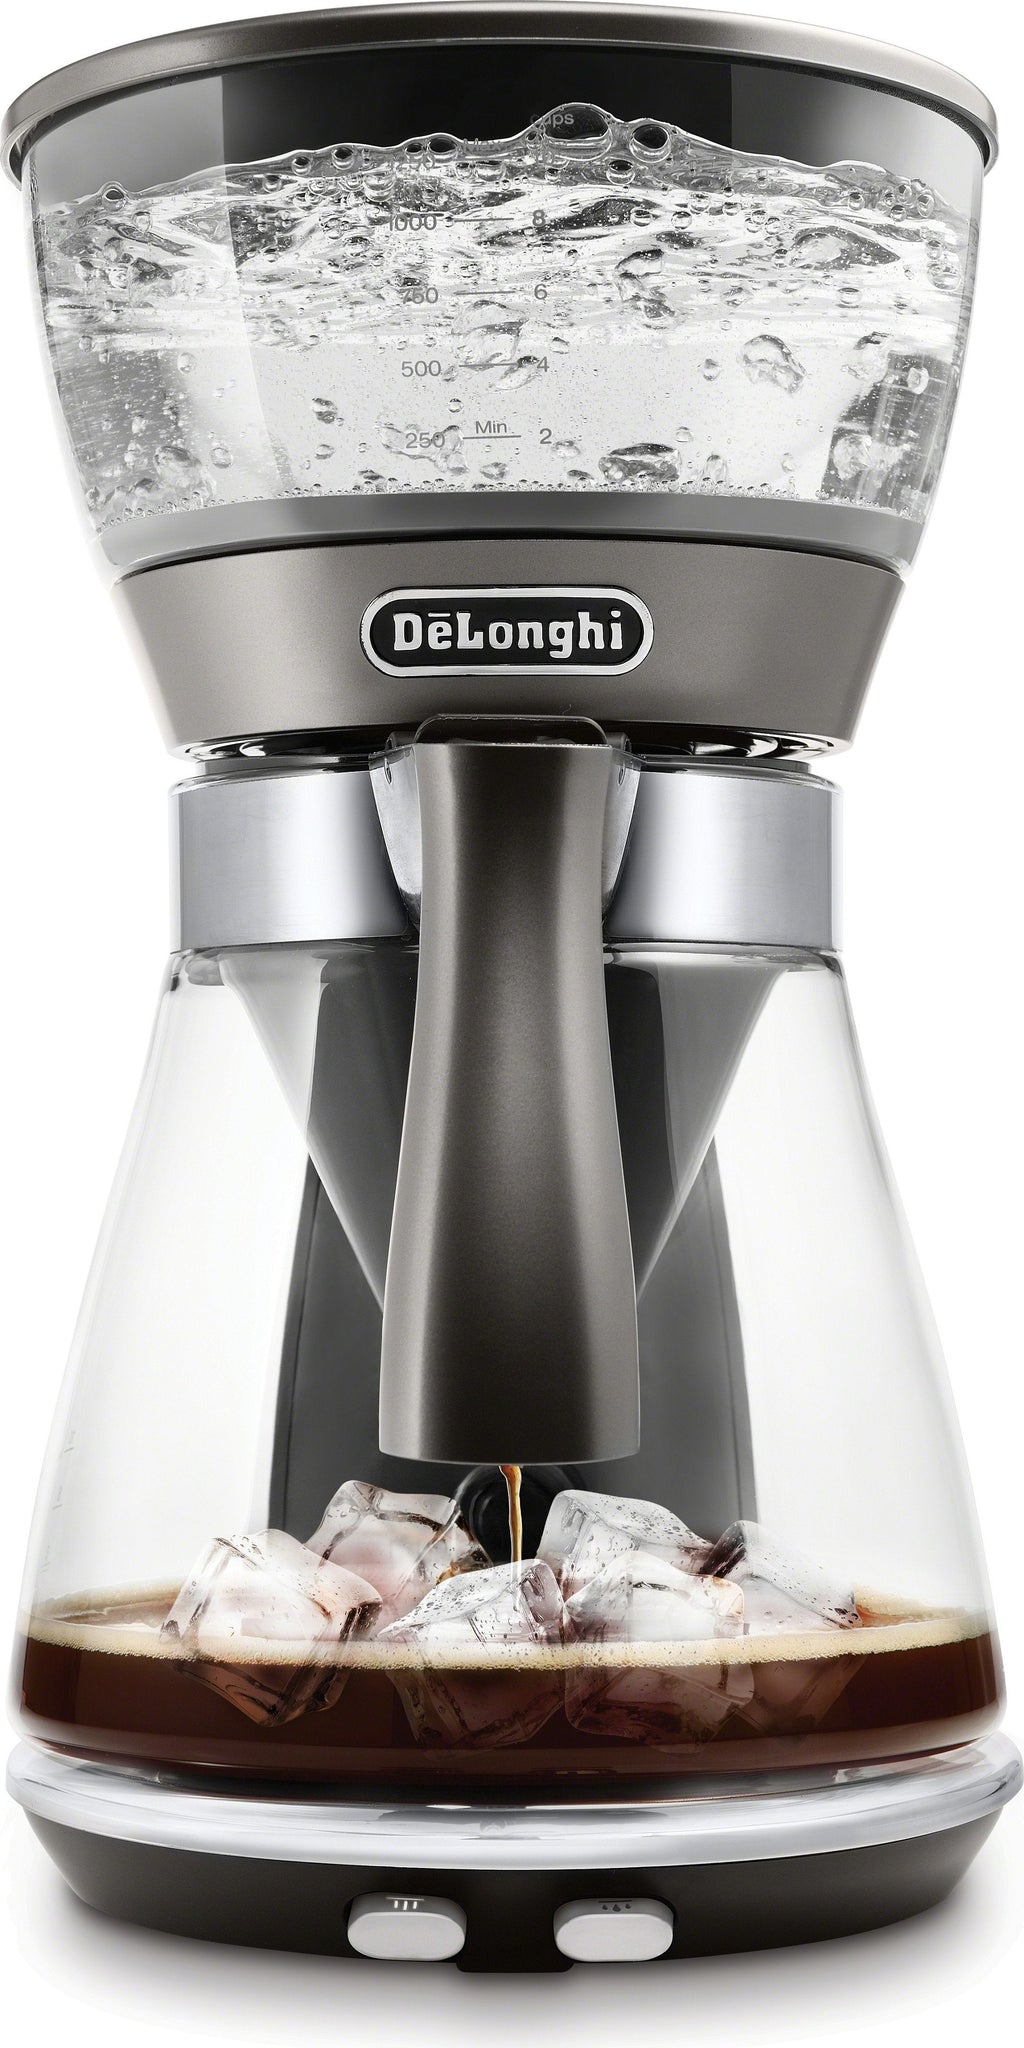 DeLonghi - 3-in-1 Specialty Brewer with certified SCA Golden Cup drip coffee, Over Ice and Pour Over brewing methods, in glass - ICM17270